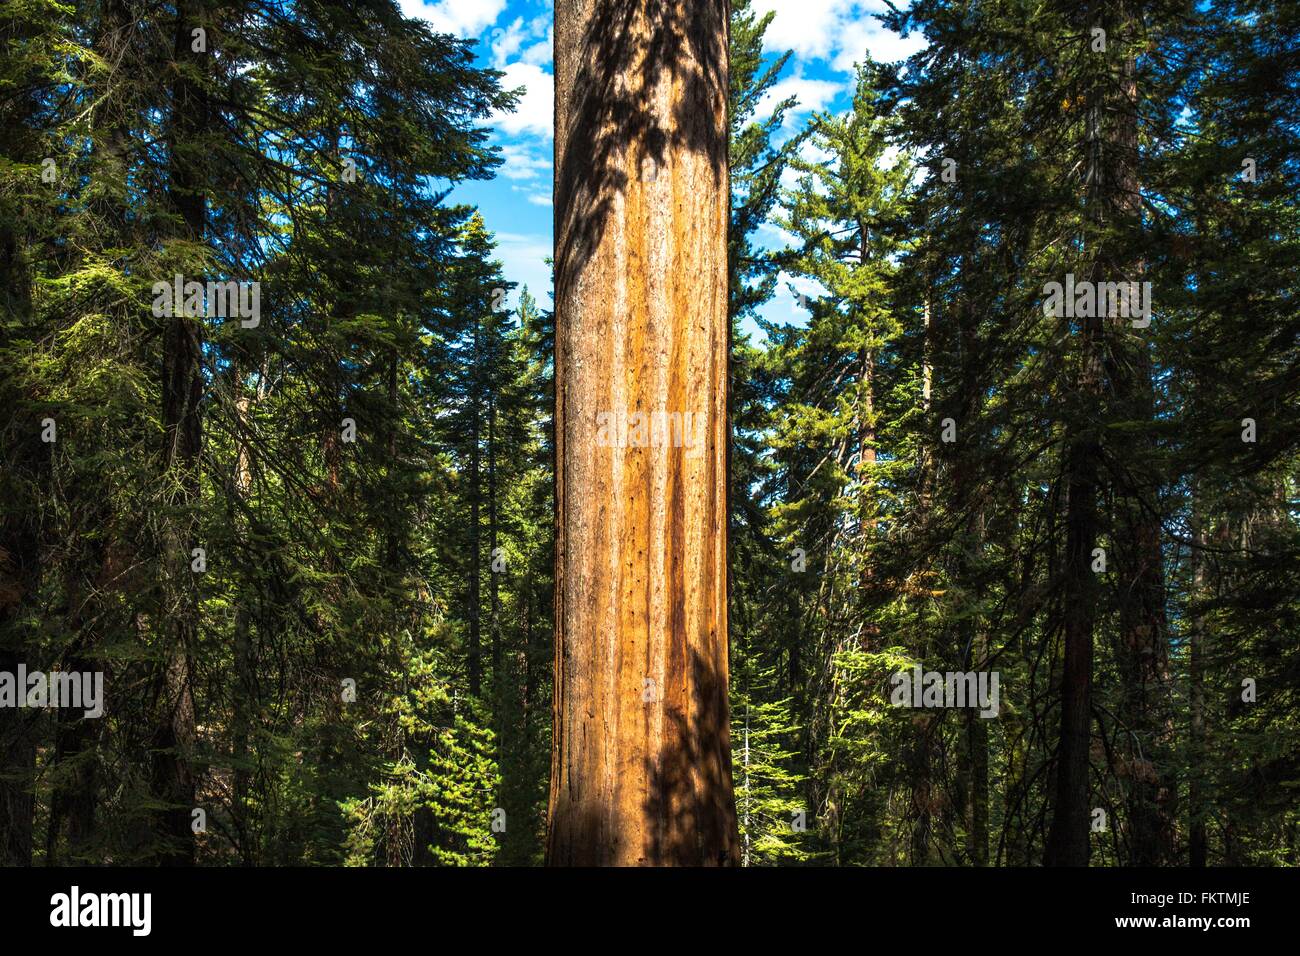 Giant redwood tree trunk in forest, Yosemite national park, California, USA Stock Photo